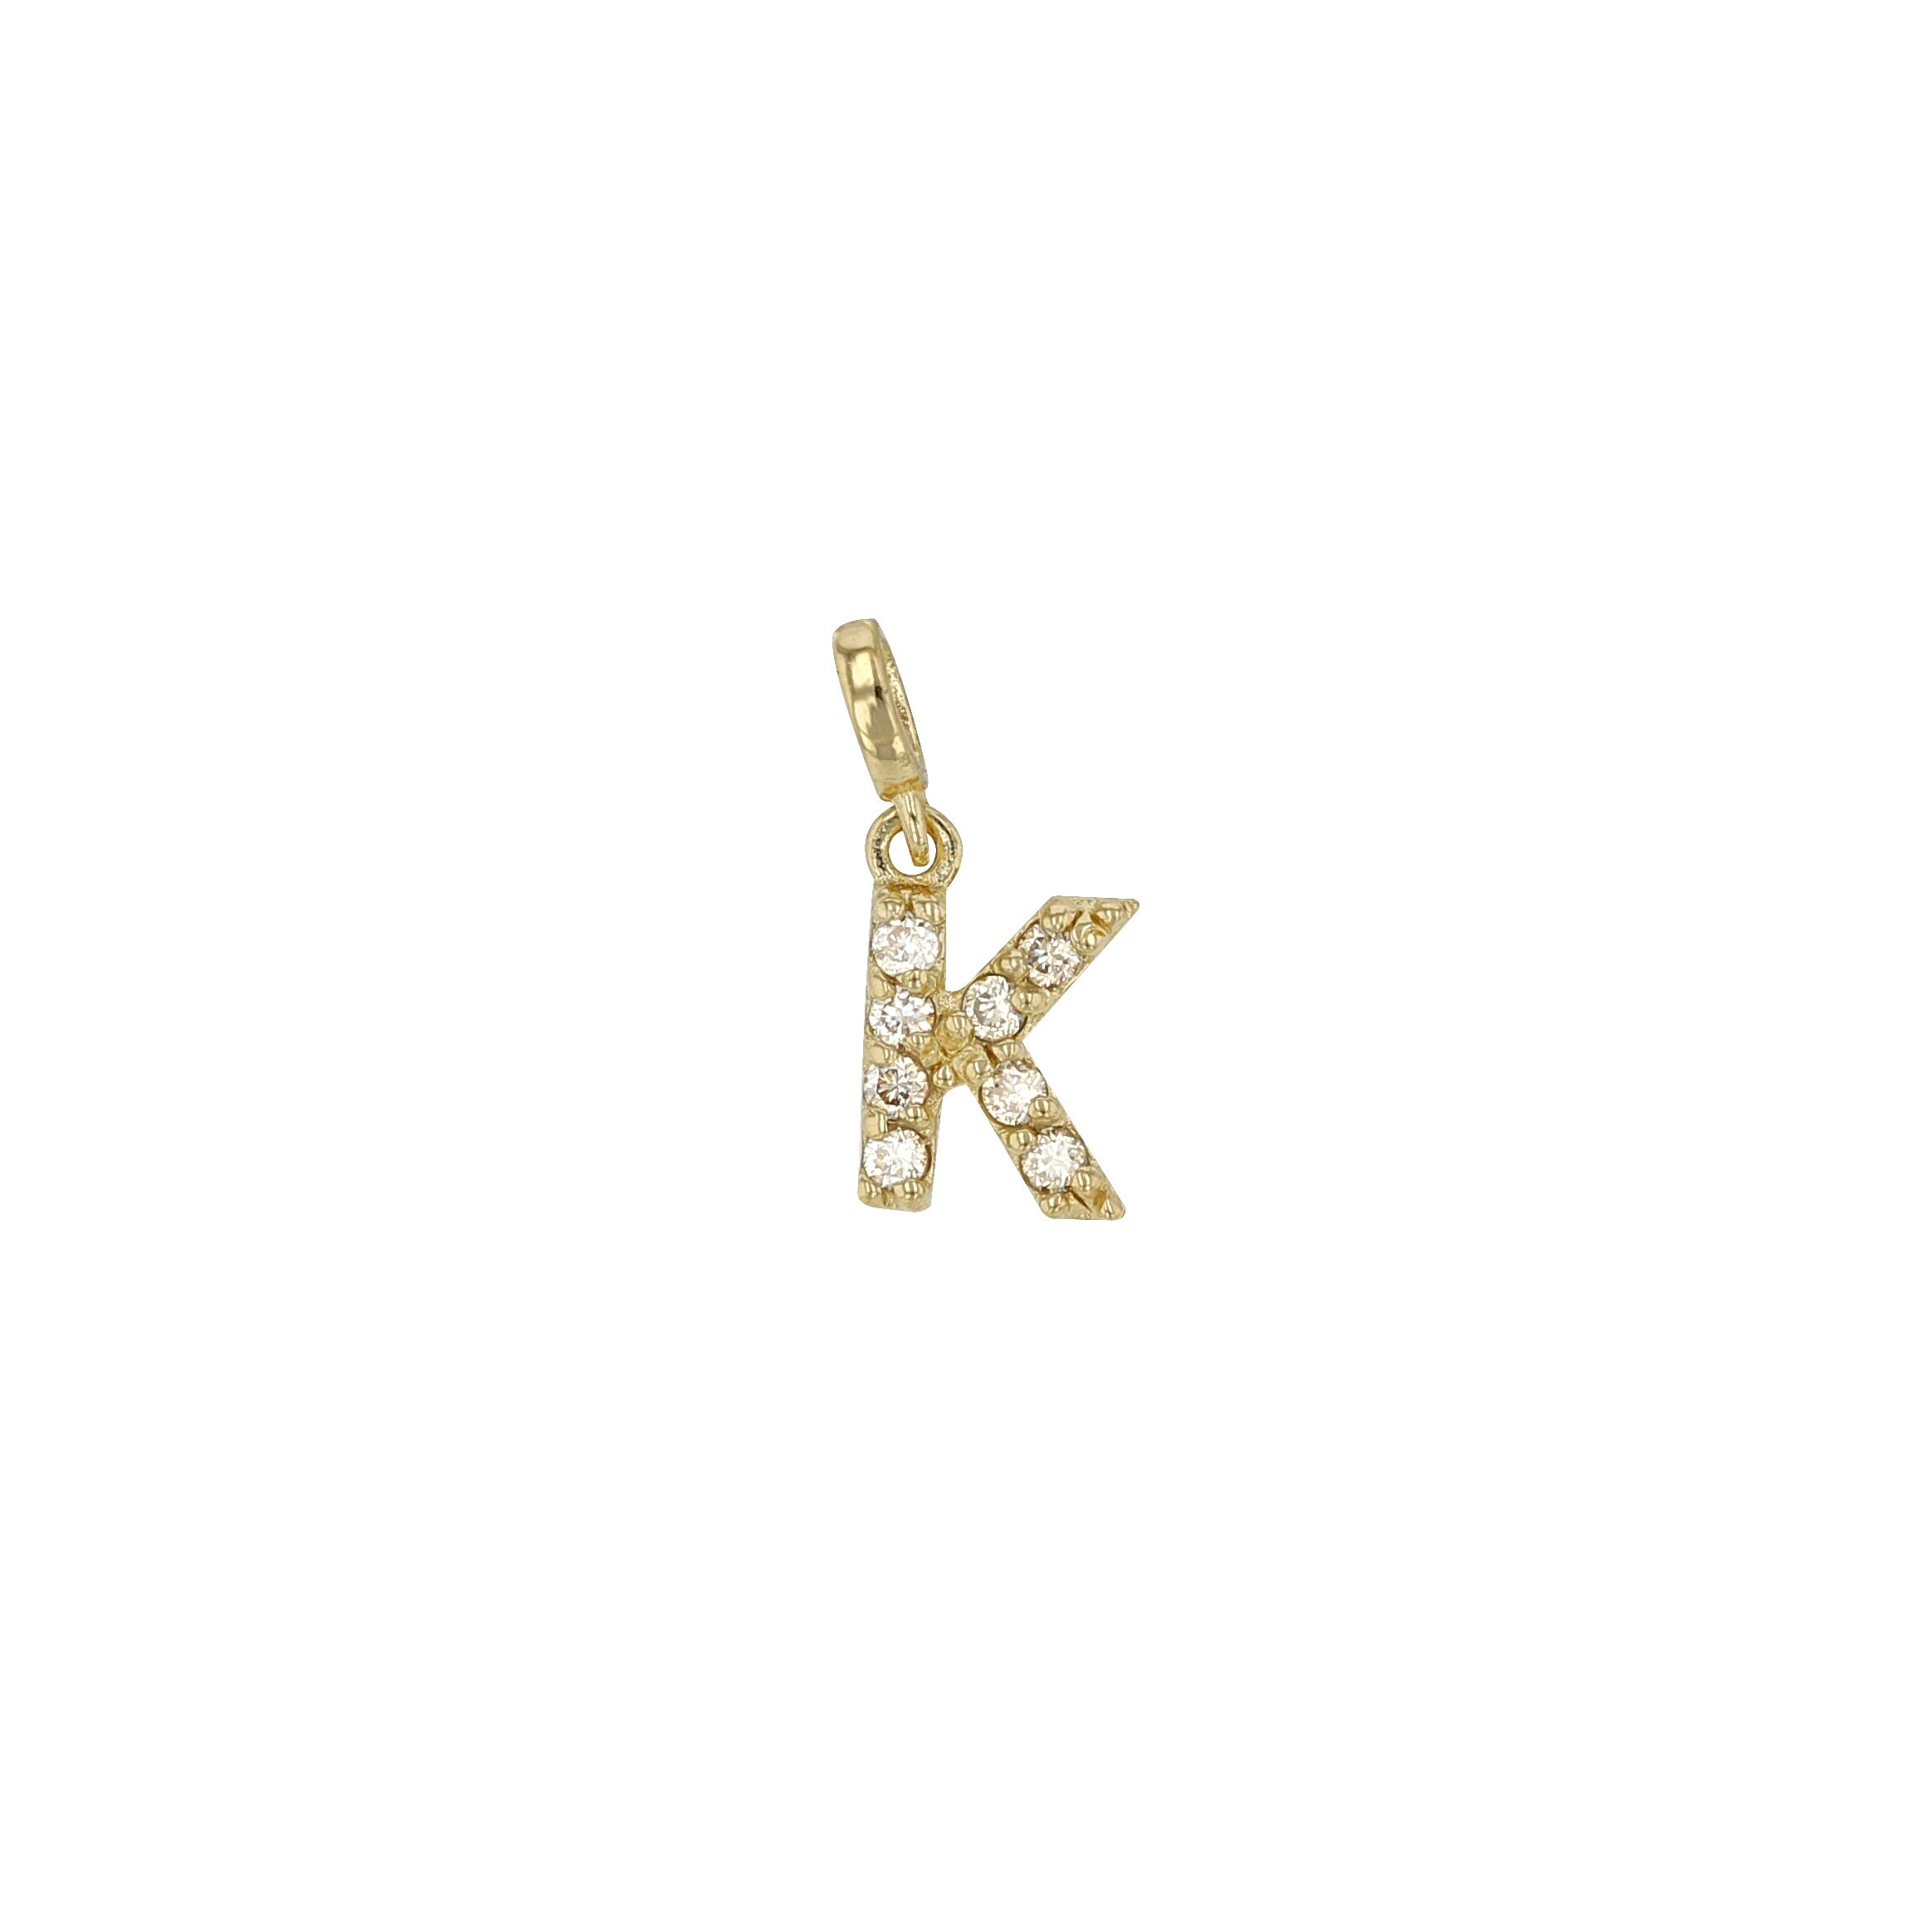 Diamond Shortener Clasp with Safety Catch in 14K Gold